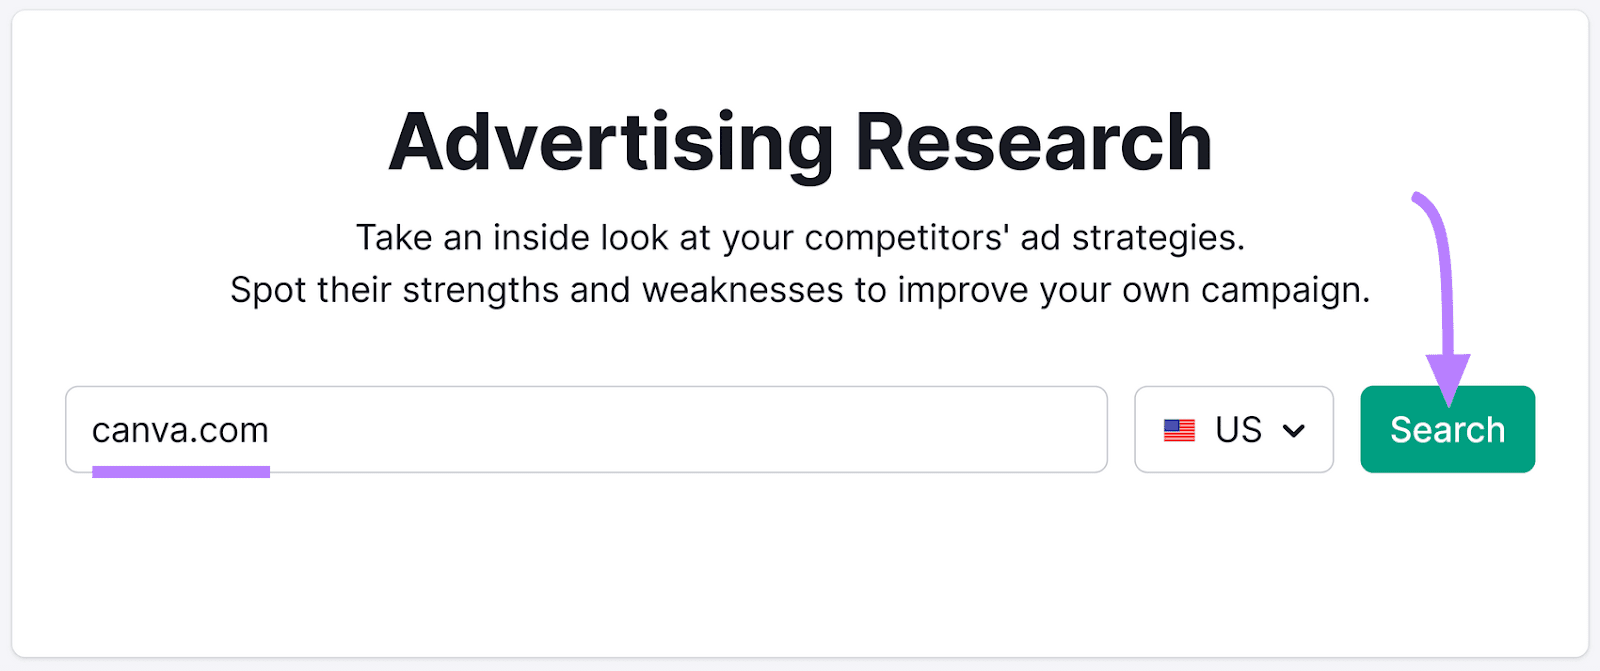 "canva.com" entered into the Advertising Research instrumentality   hunt  bar